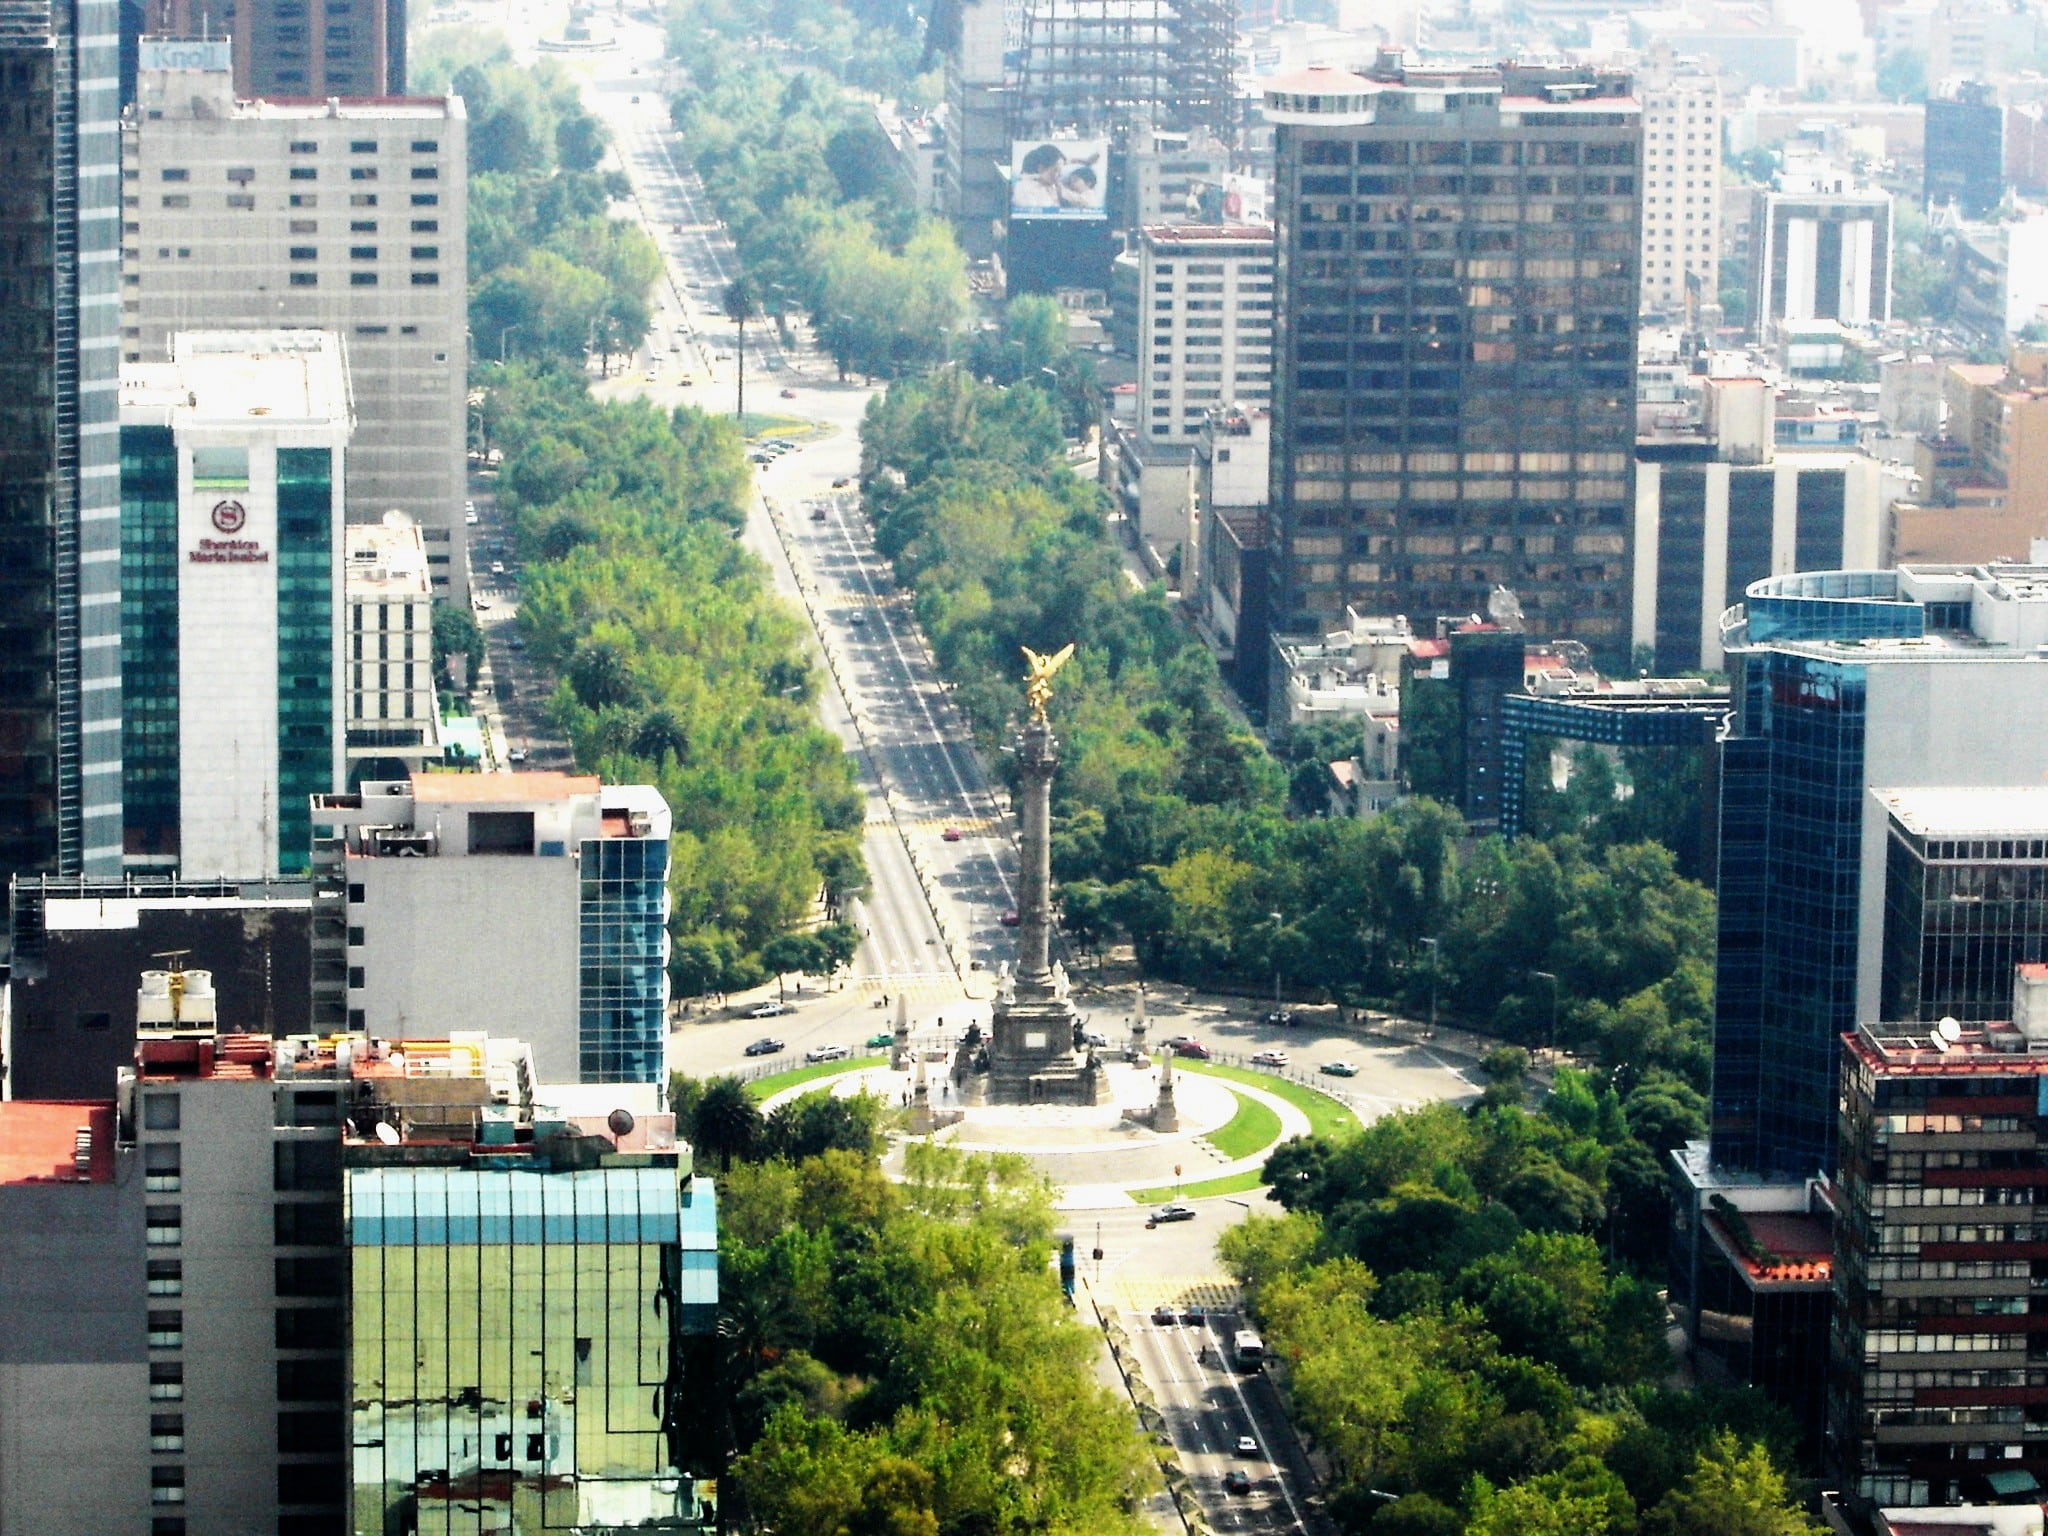 Exploring the neighborhoods is a great Mexico City travel tip